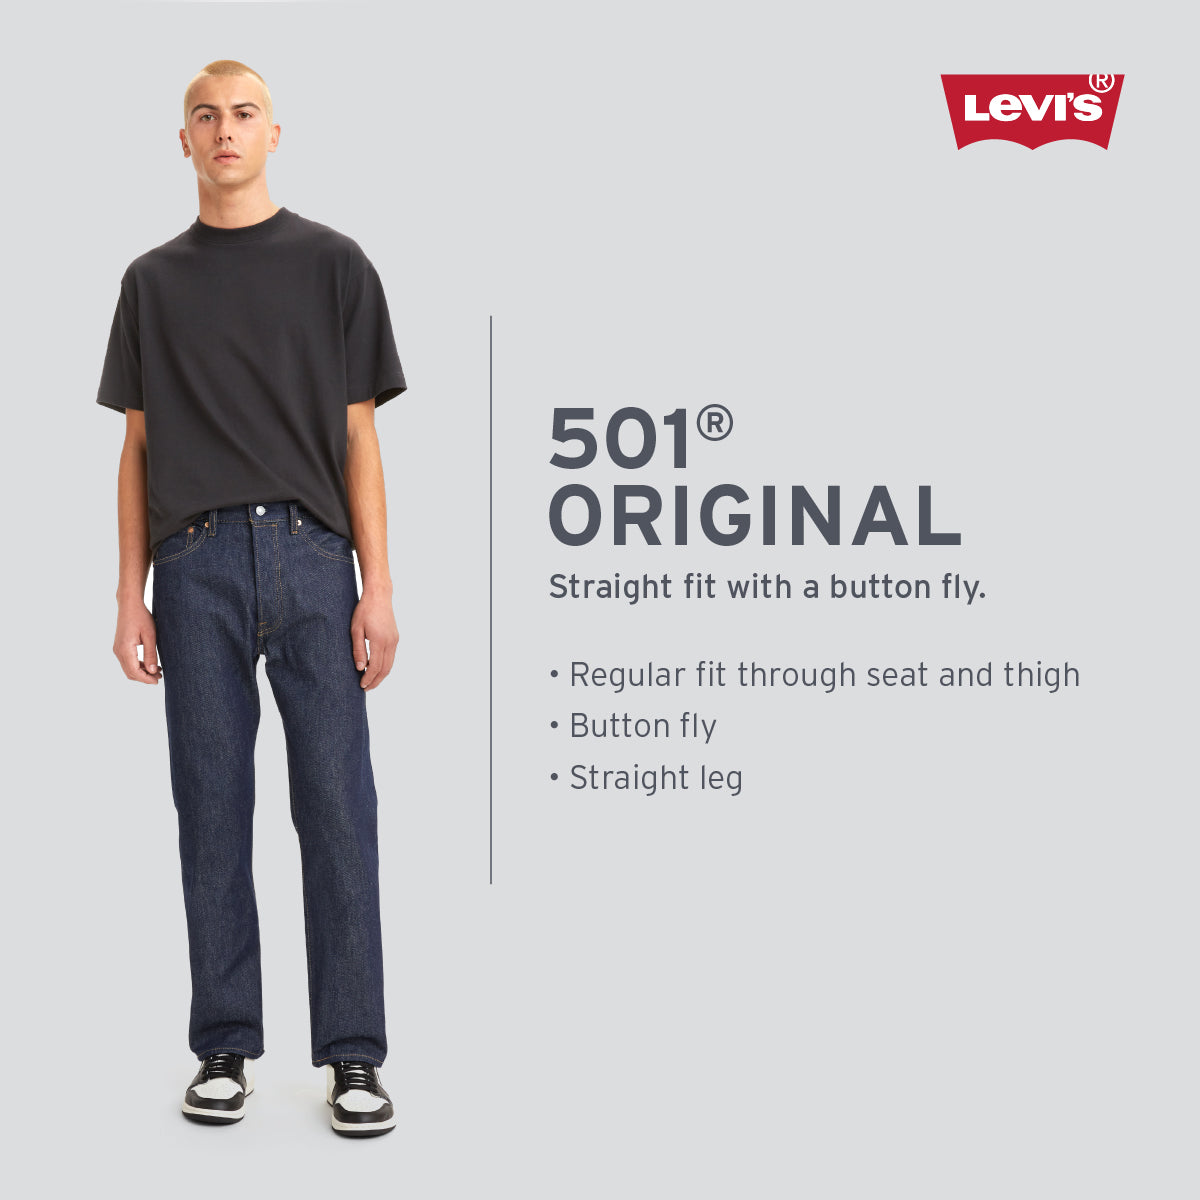 How to Spot Fake Levi's?